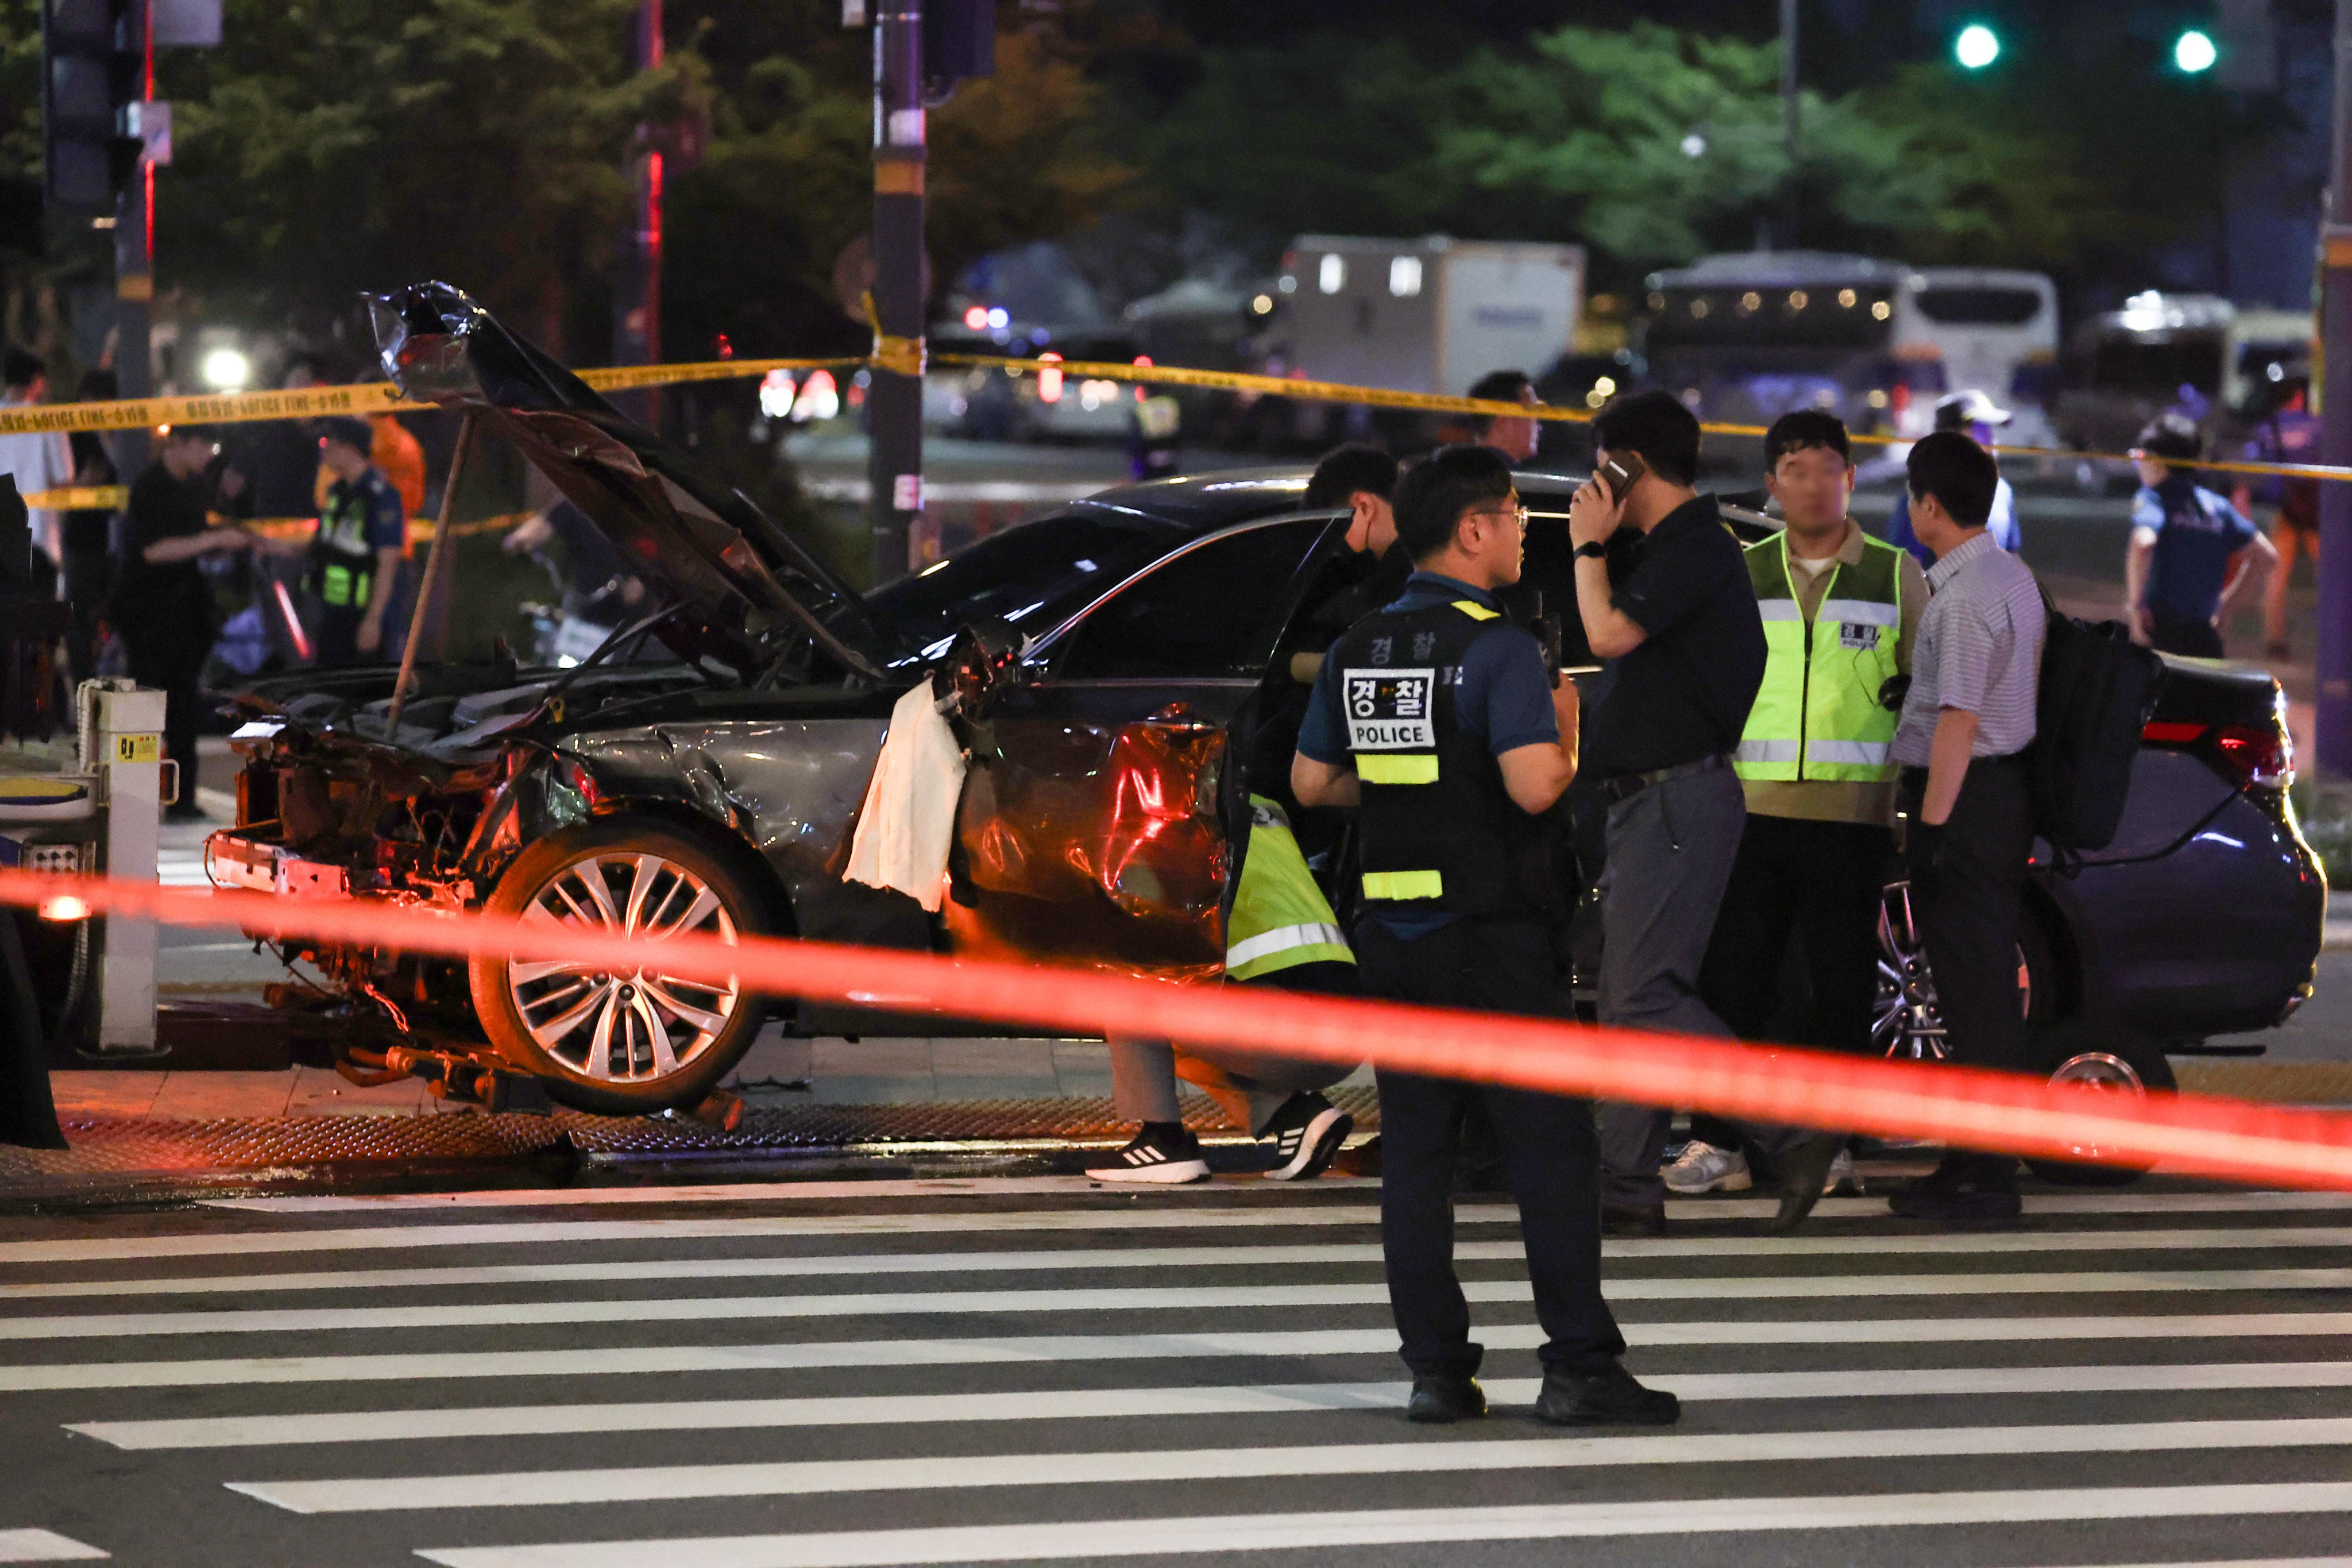 The scene of the car crash in downtown Seoul, South Korea on Monday night. Photo: Yonhap / dpa